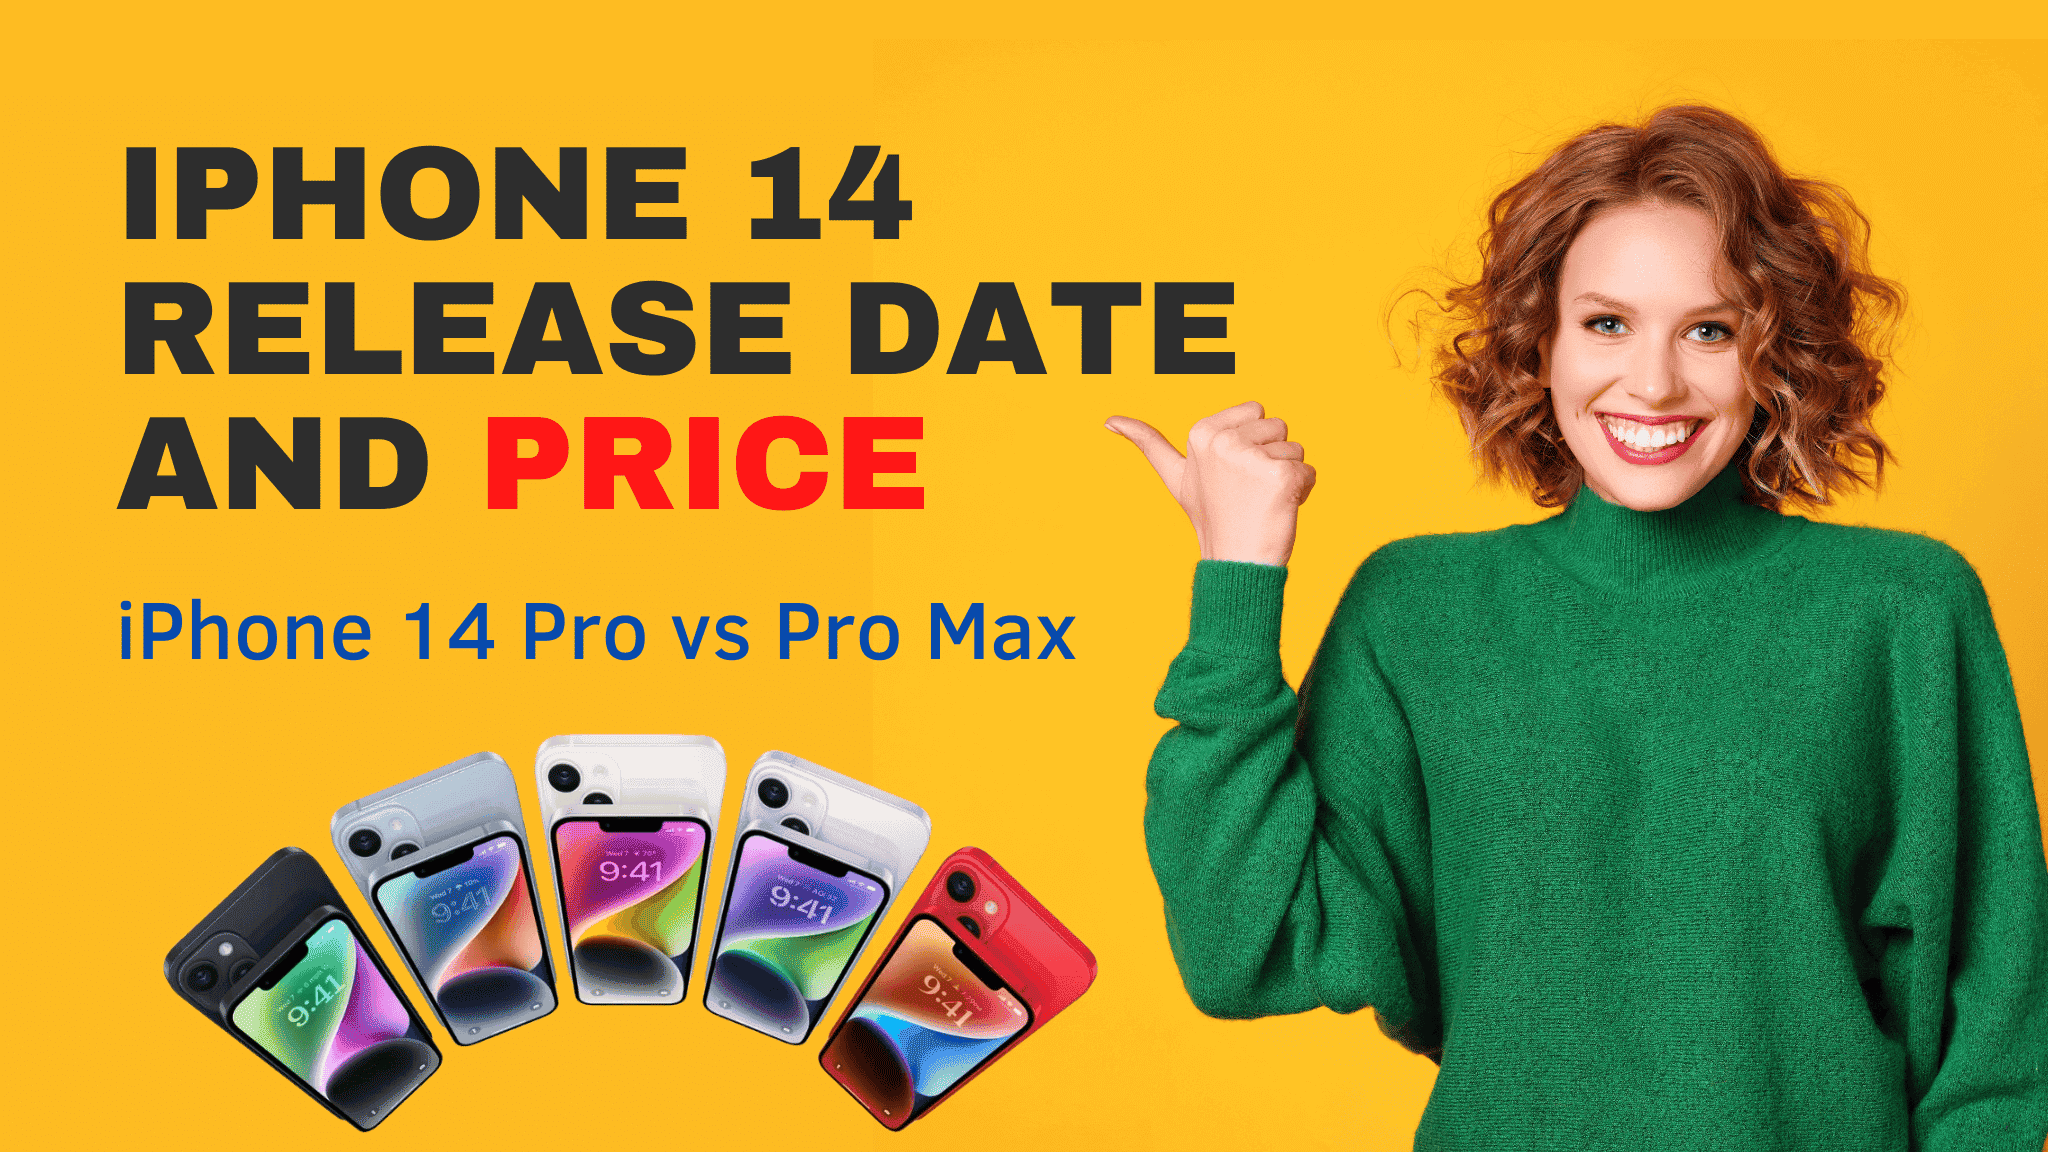 iPhone 14 Pro vs iPhone 14 Pro Max: Which is Better? -New Features